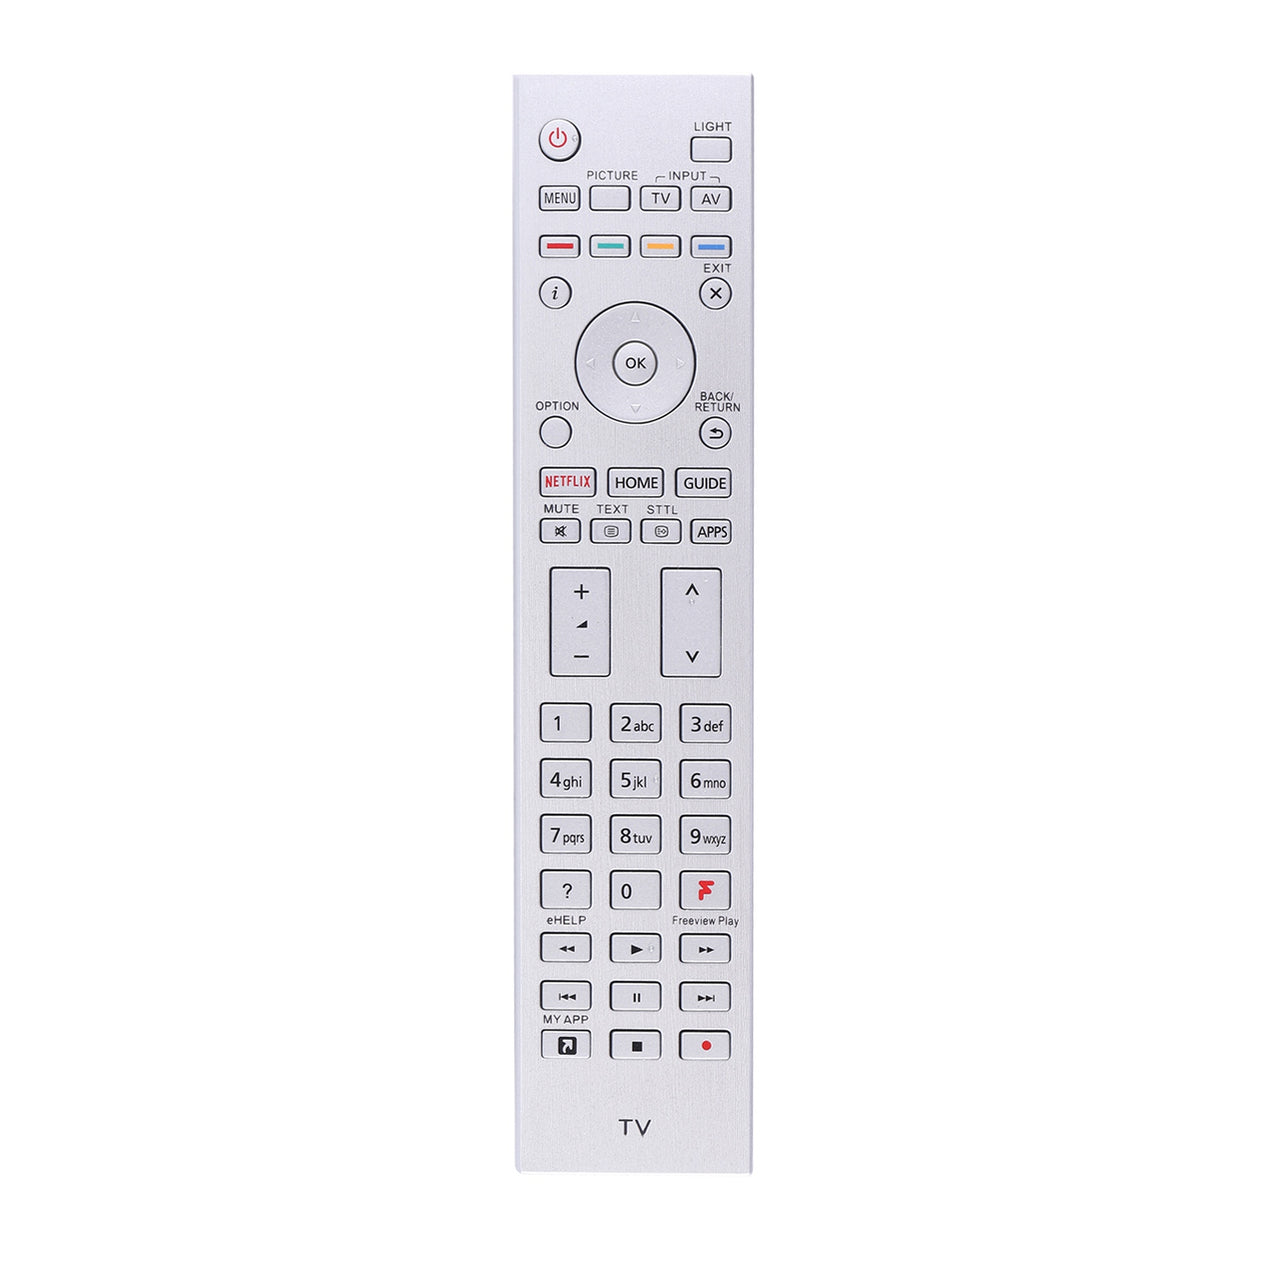 N2QAYA000153 Replacement Remote for Panasonic Televisions